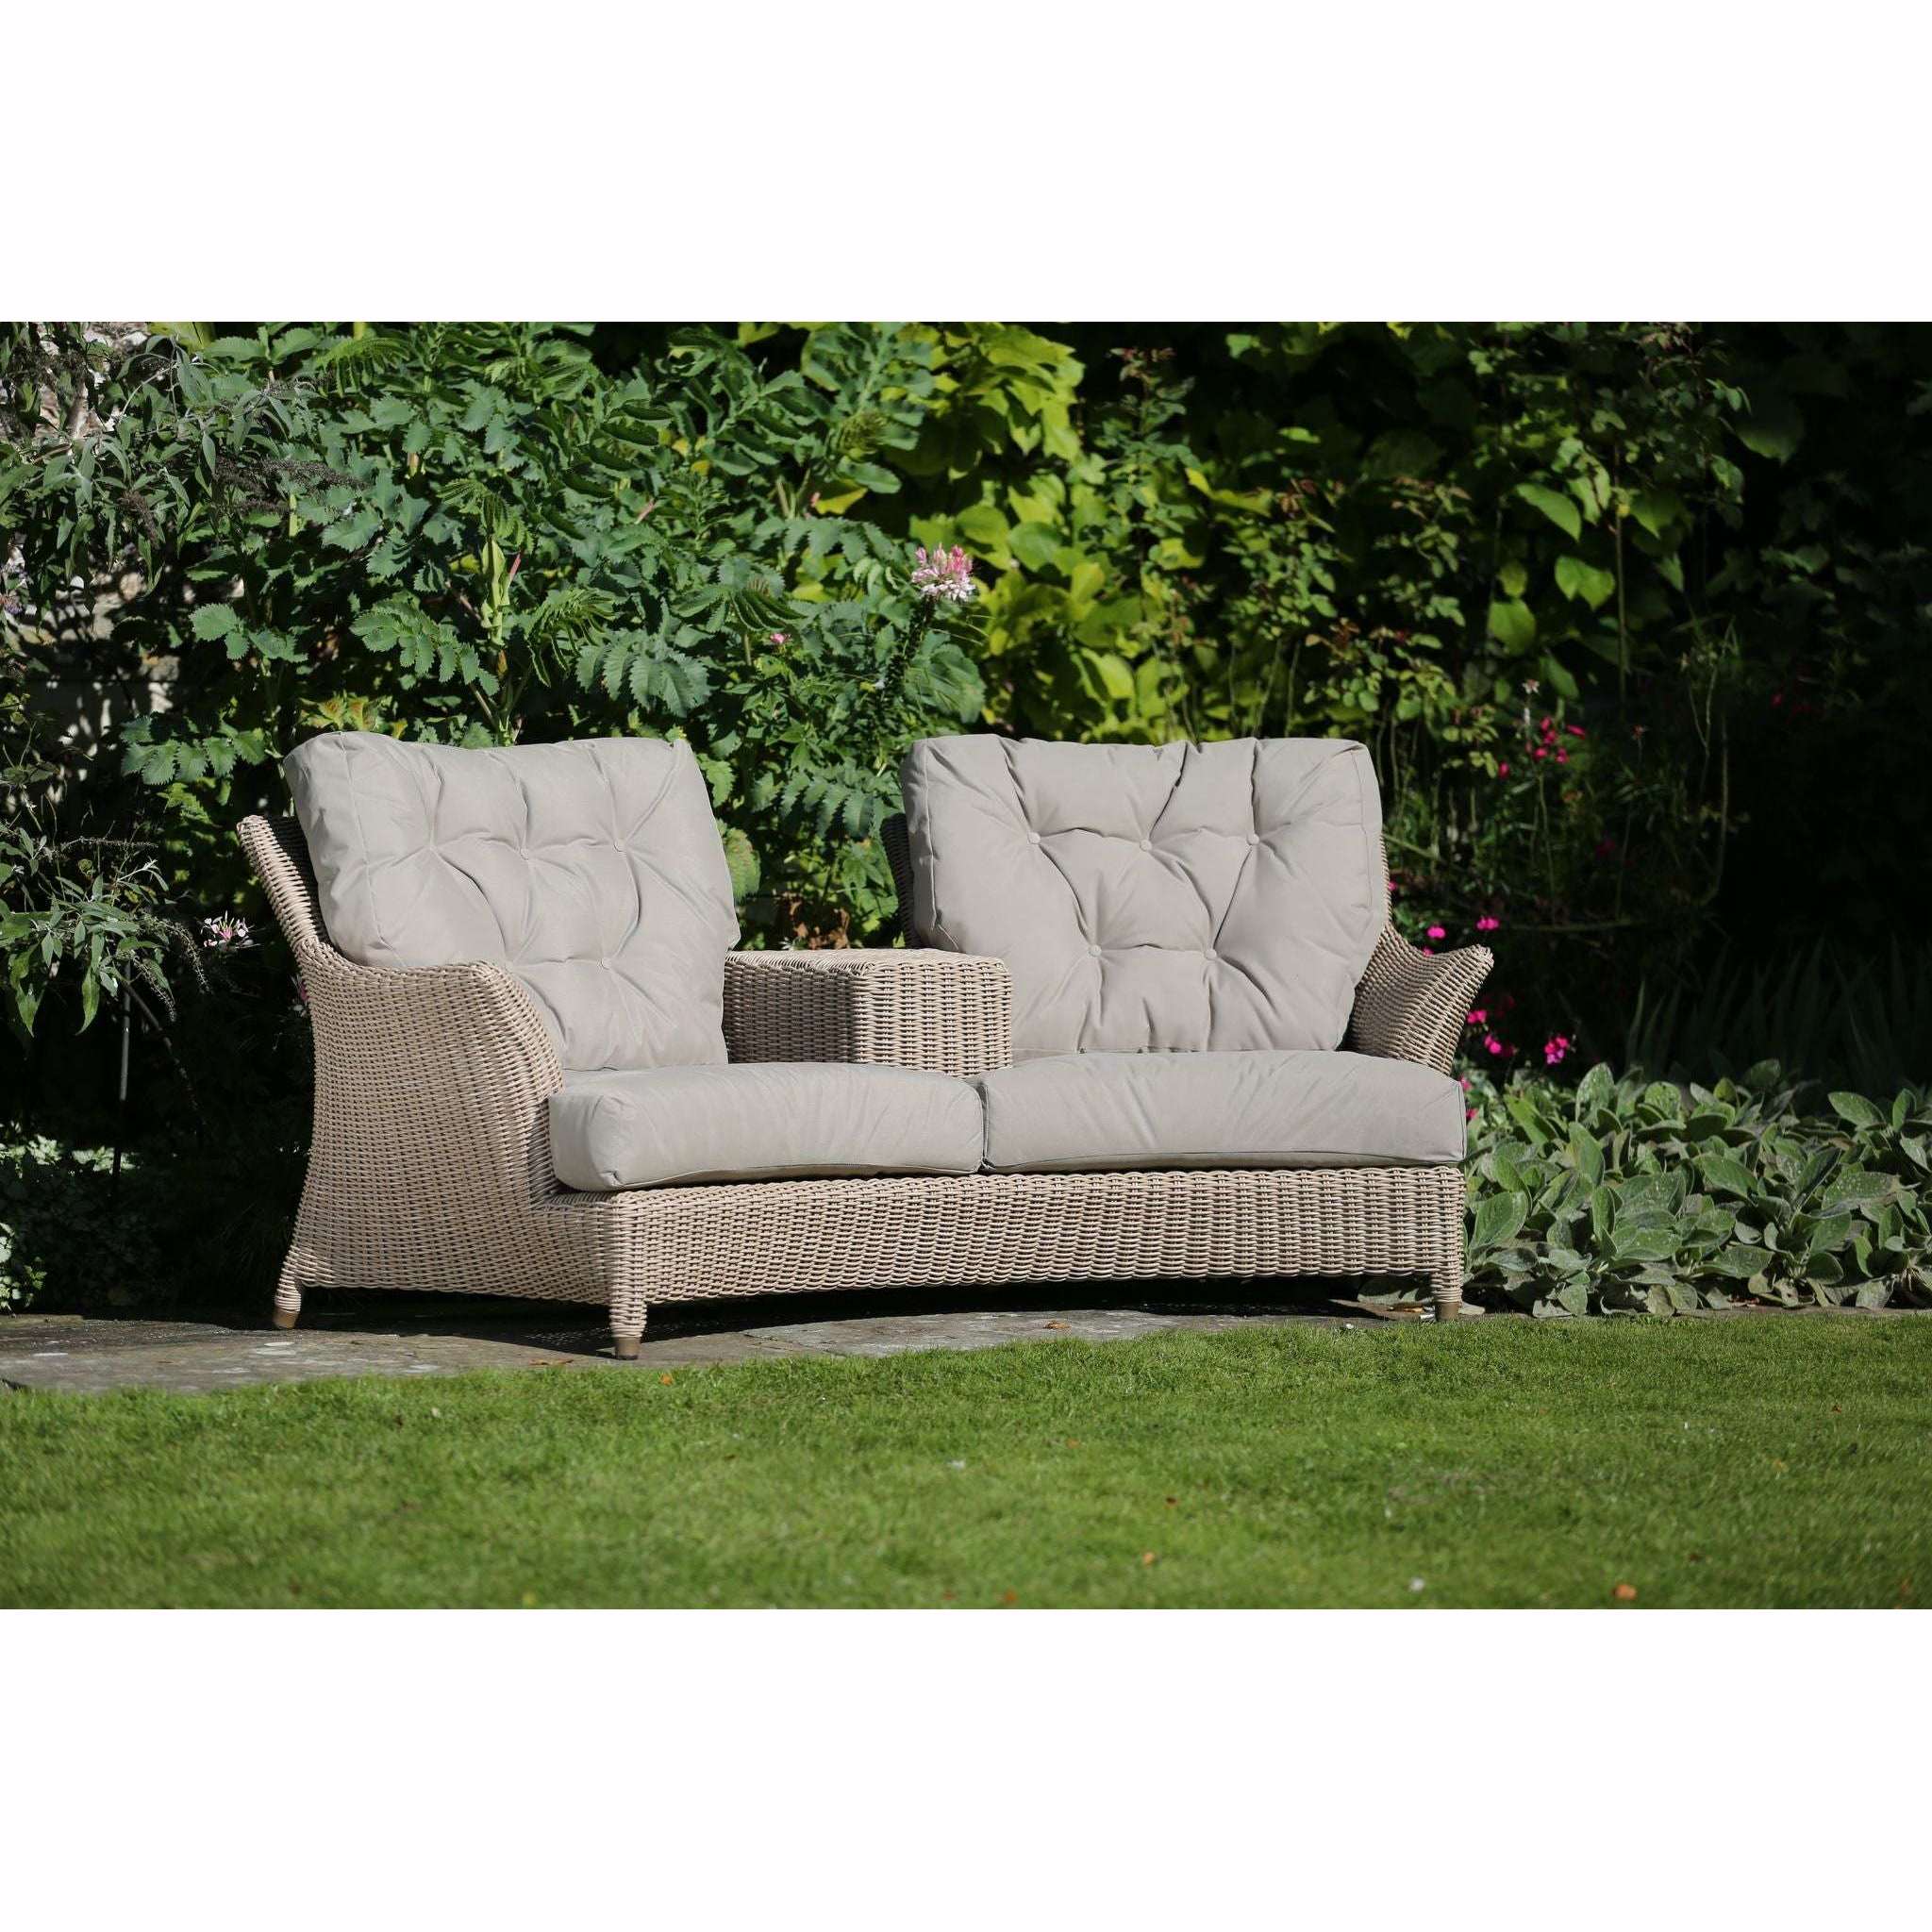 Exceptional Garden:4 Seasons Outdoor Valentine Loveseat with 4 cushions